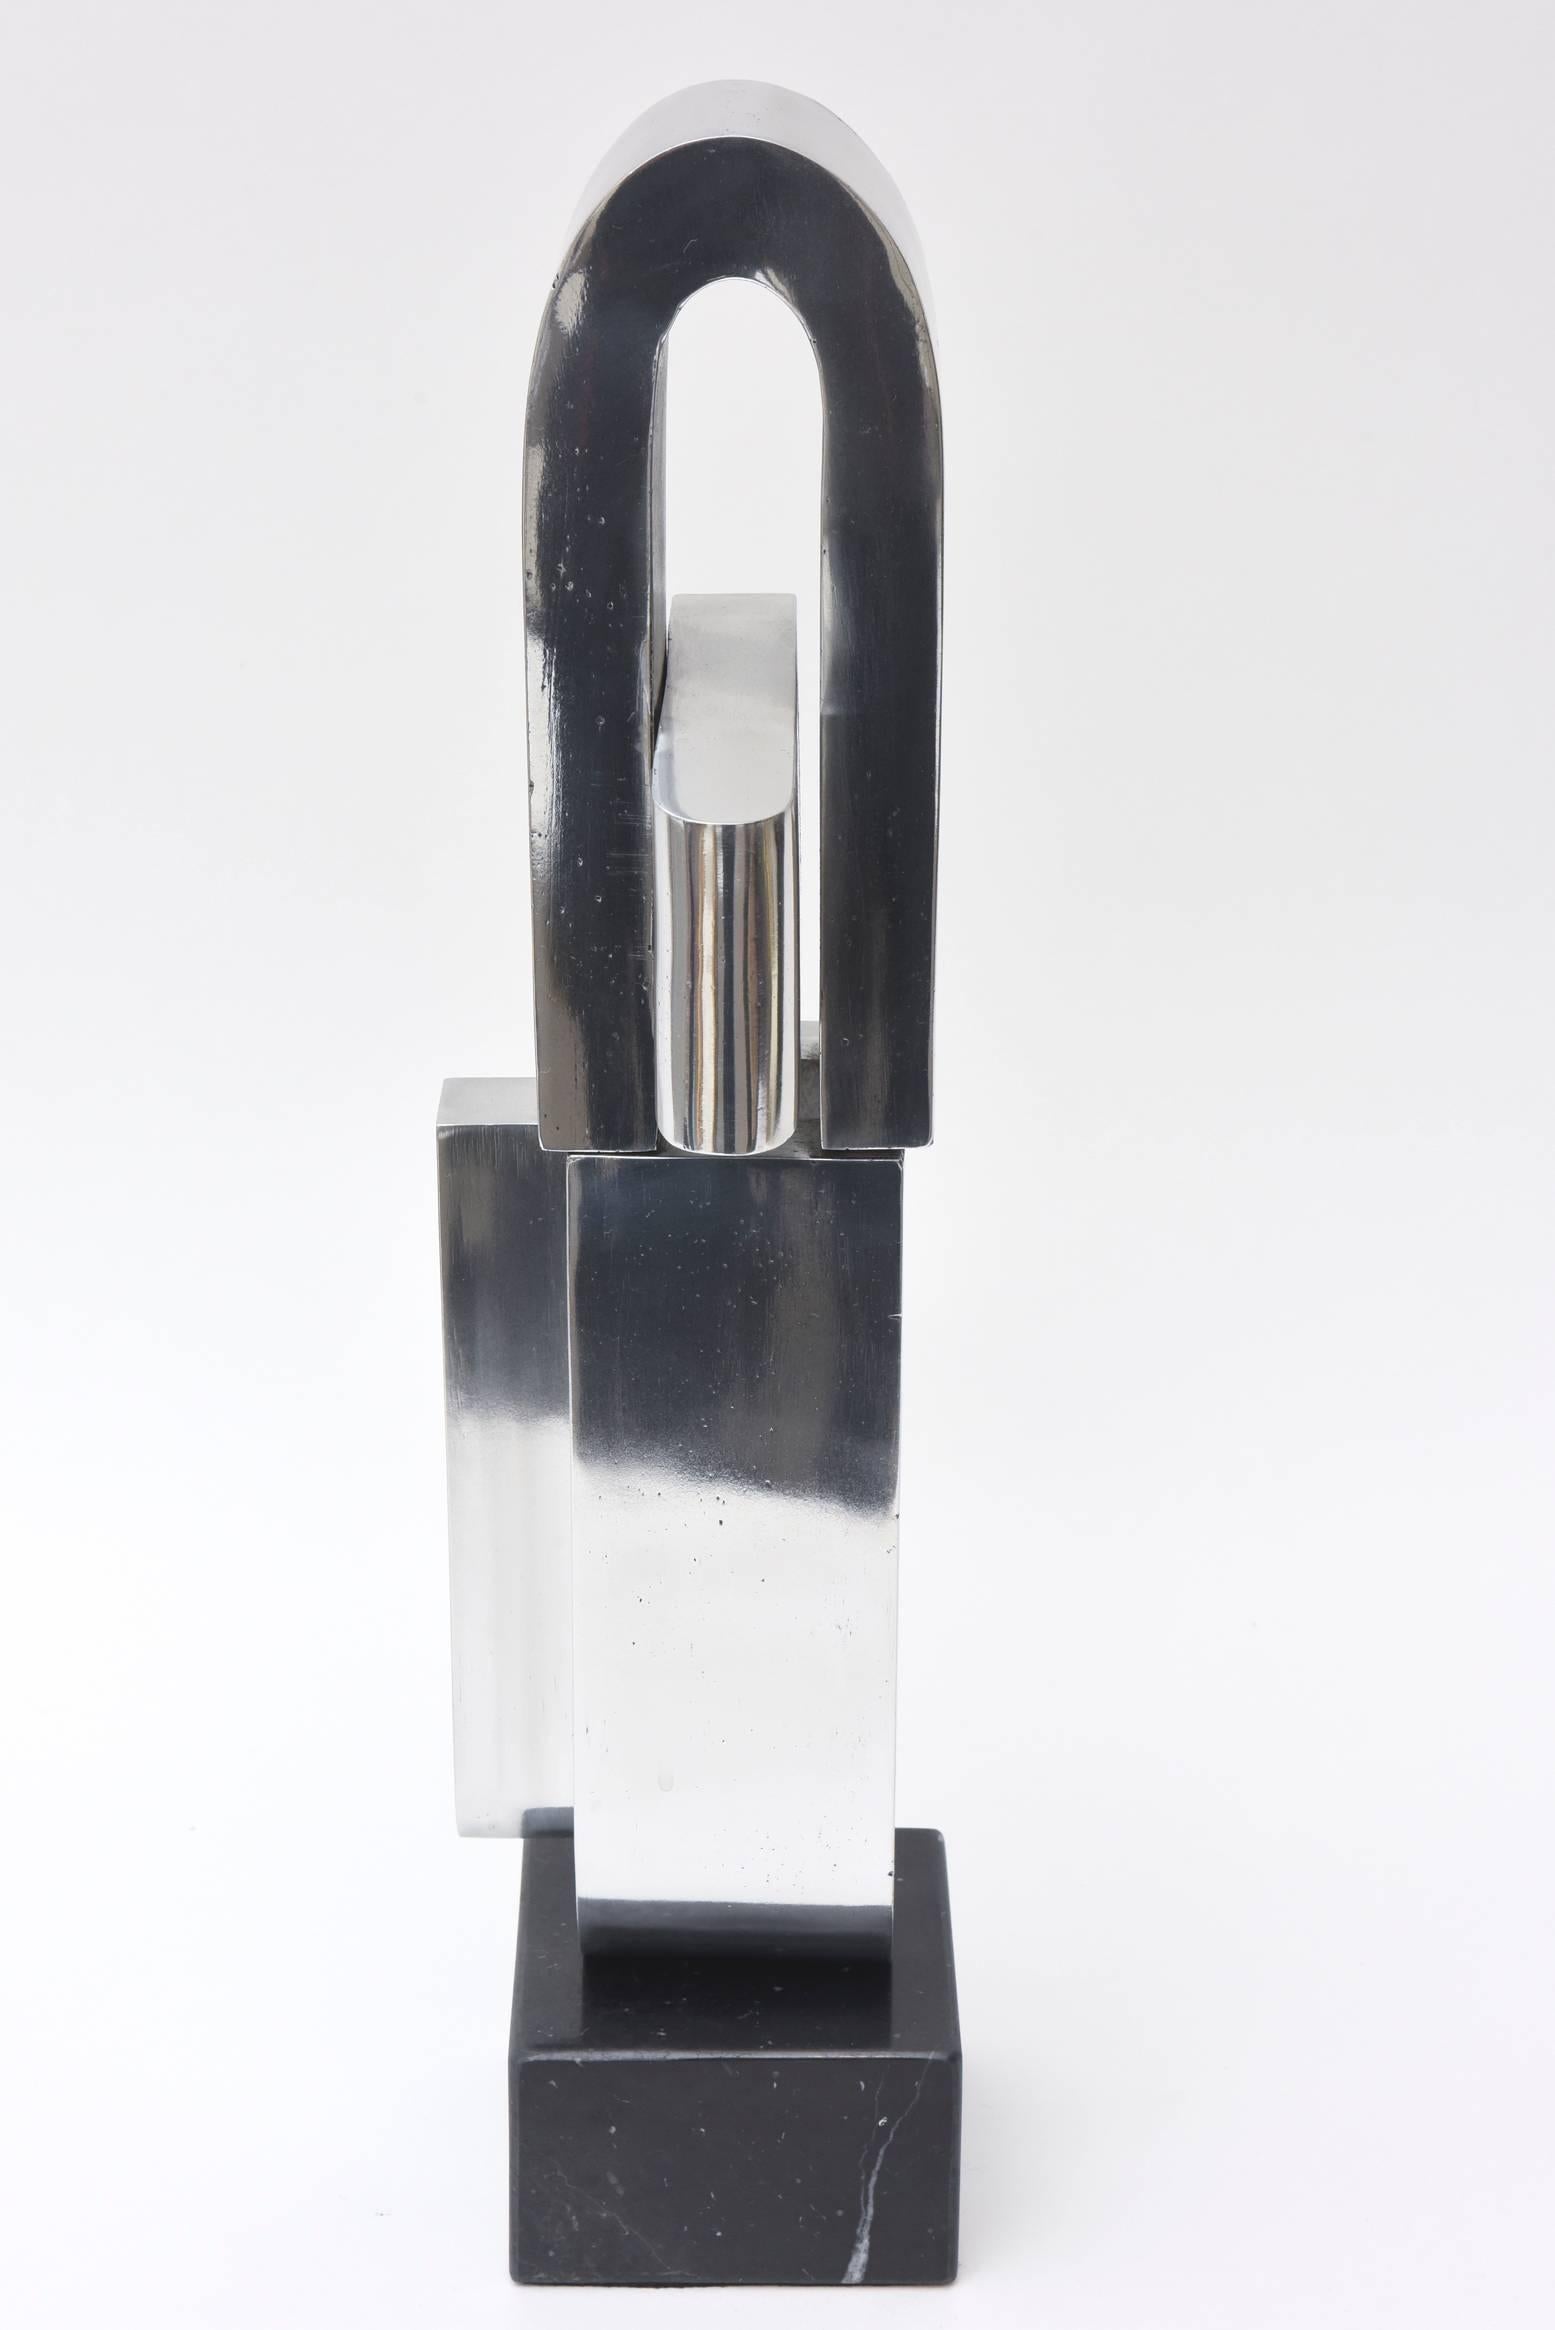 Mary Preminger Vintage Abstract Chrome and Black Marble Sculpture Modernist In Good Condition For Sale In North Miami, FL